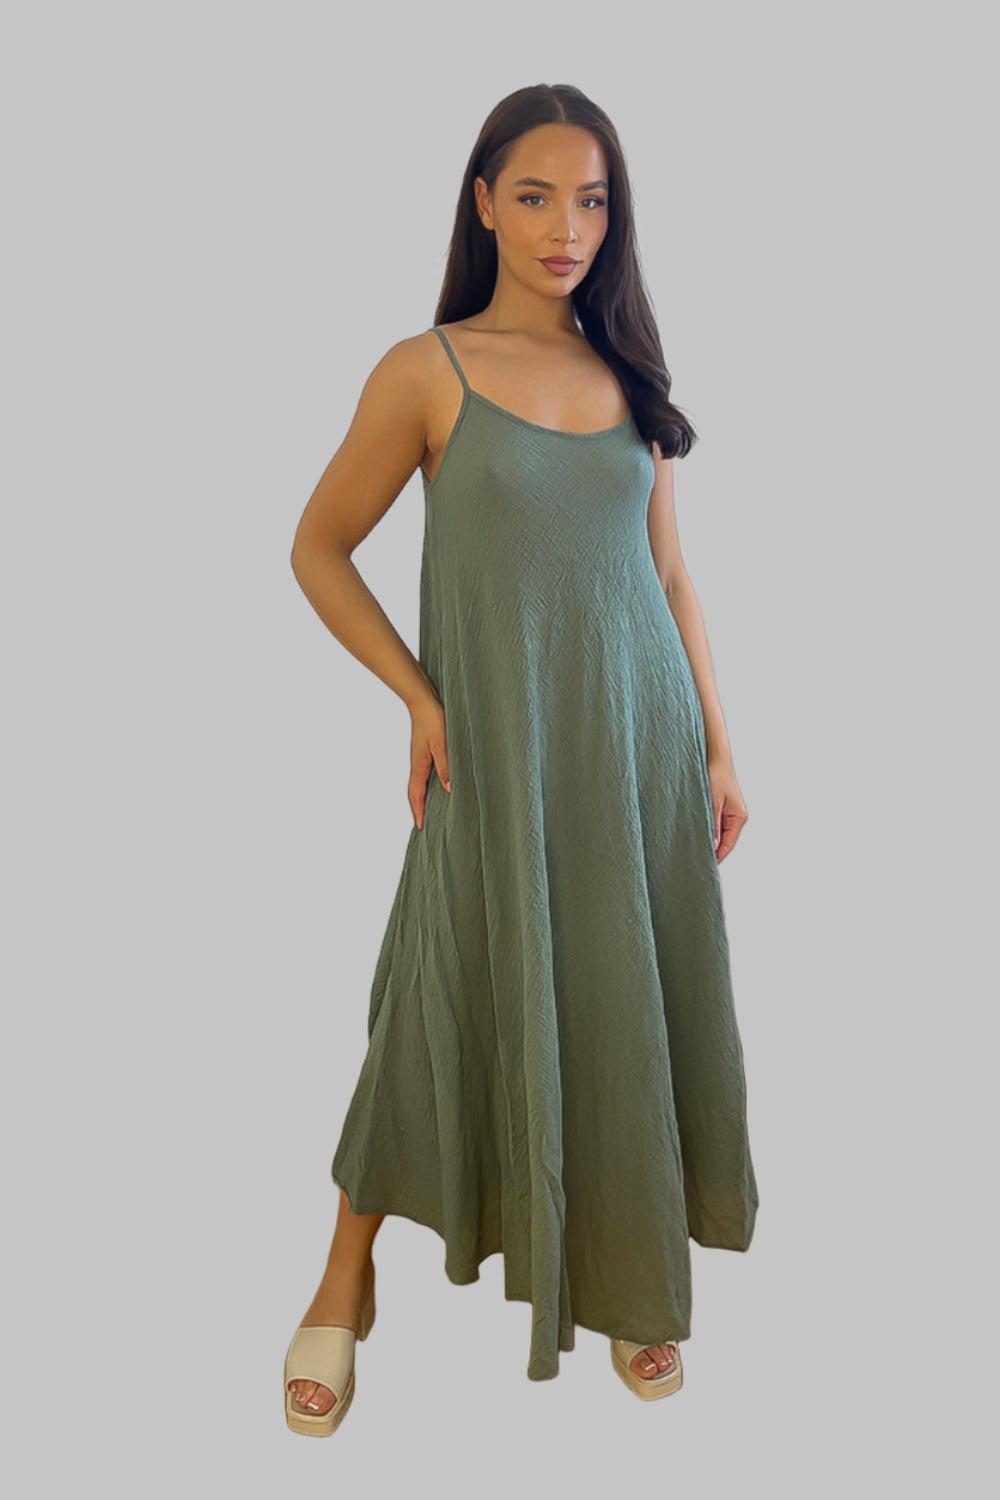 Strappy Sheer Cheesecloth Flowy Sundress-SinglePrice